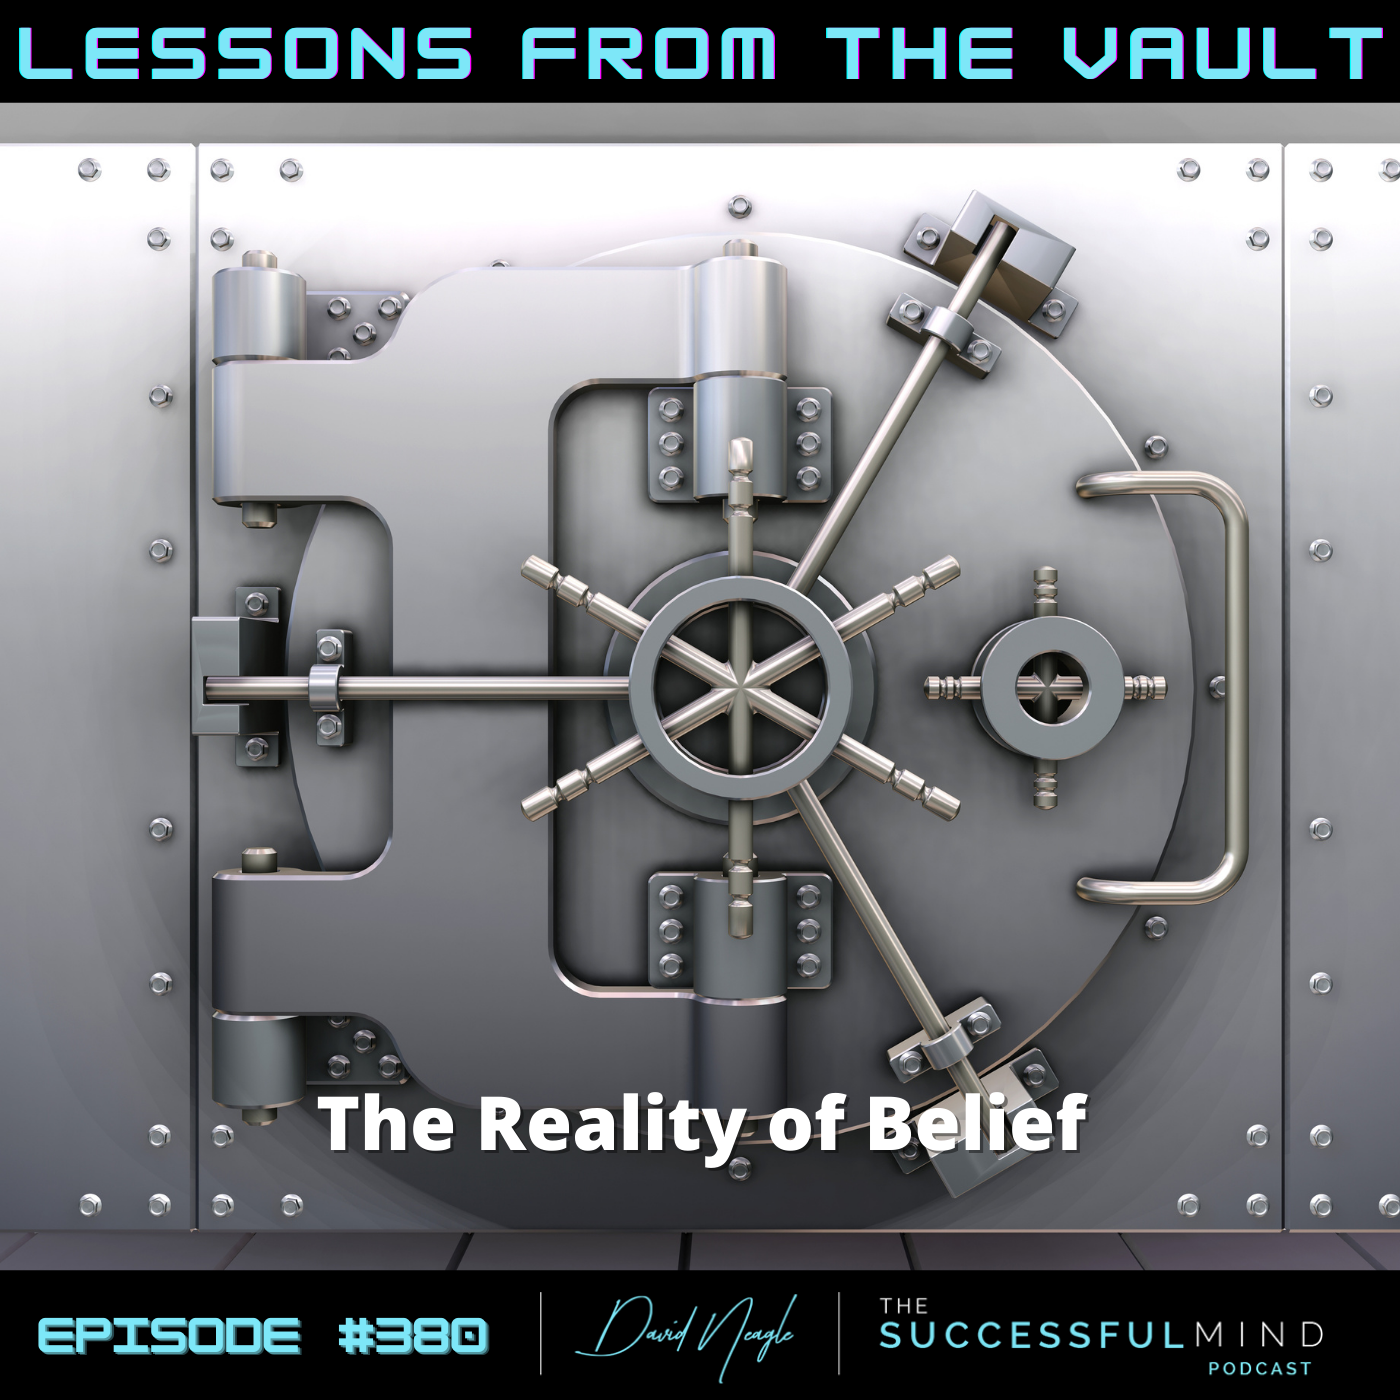 The Successful Mind Podcast- Lessons From The Vault - The Reality of Belief